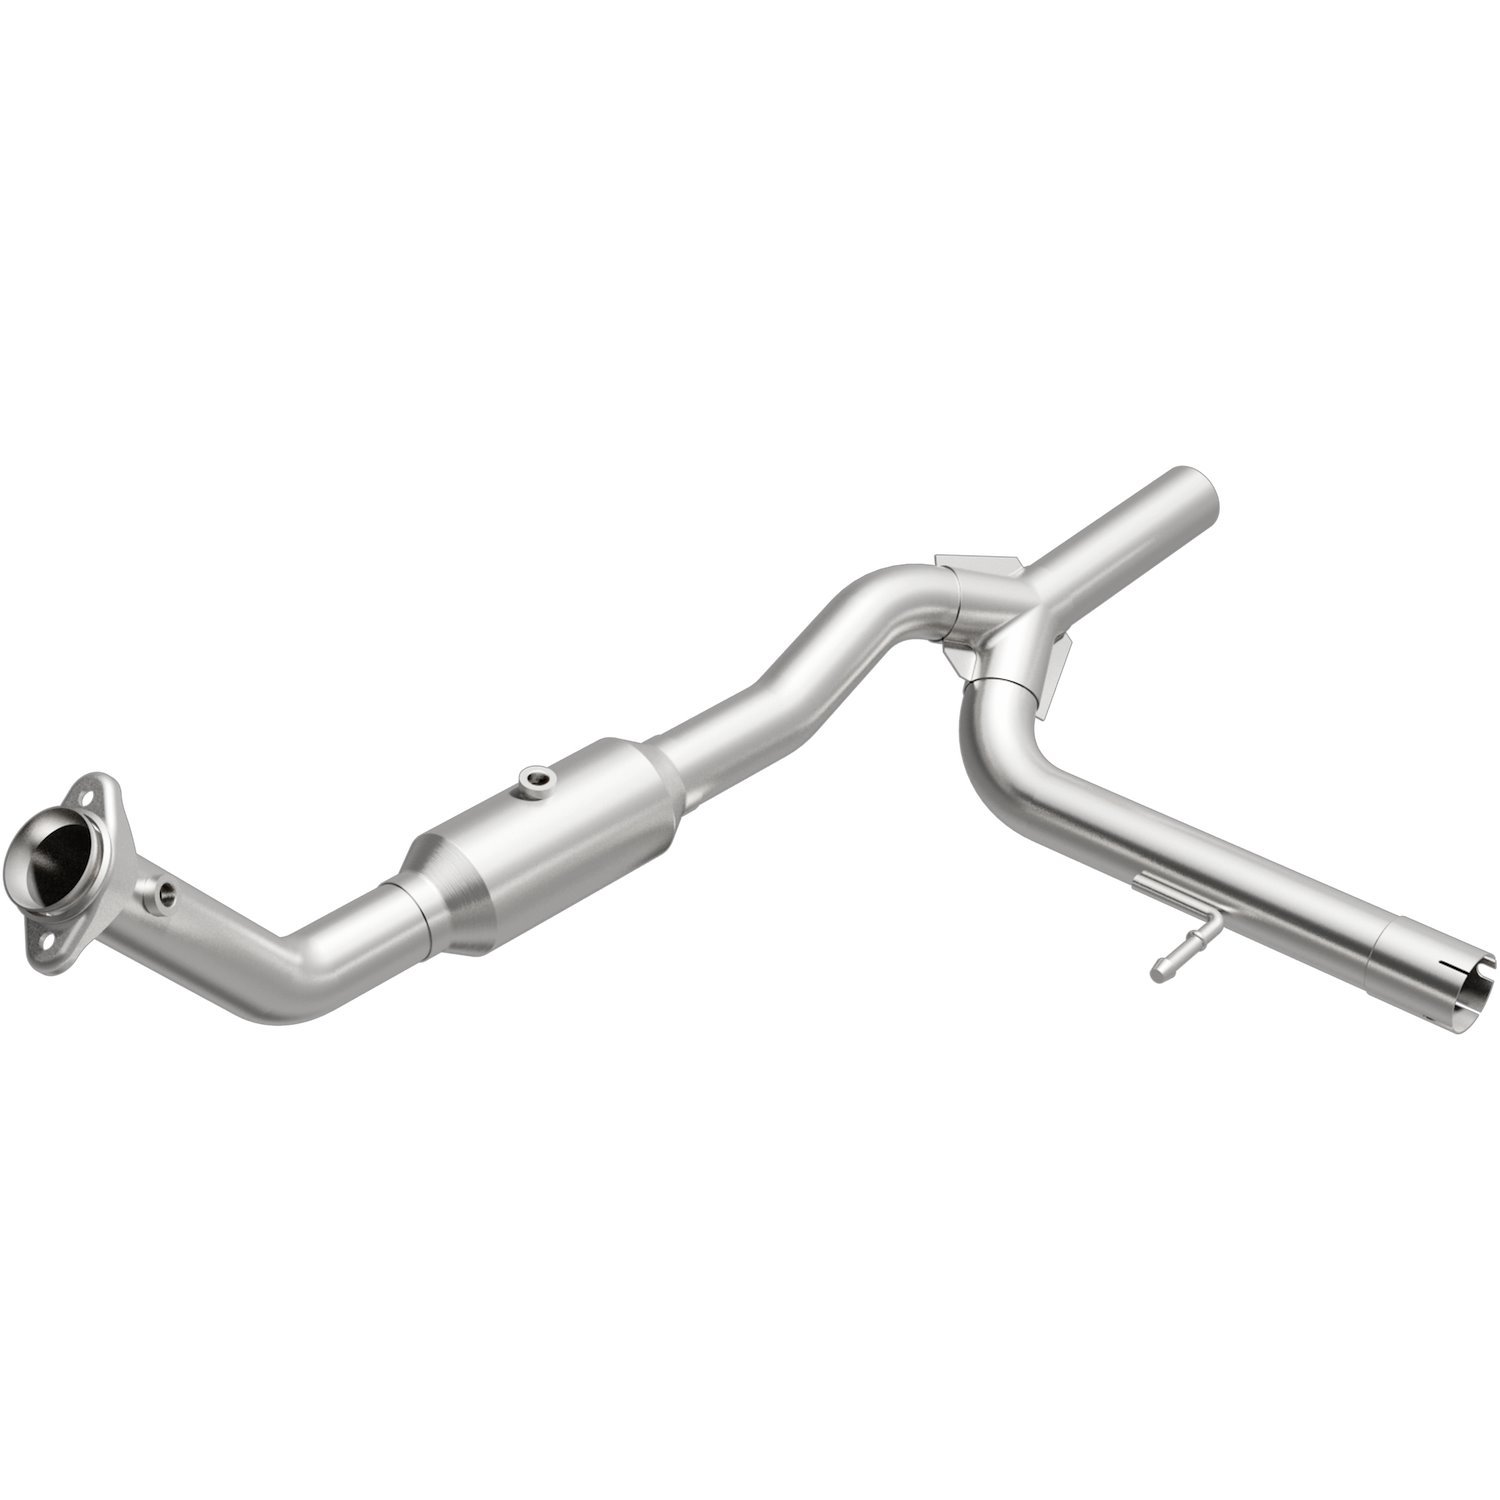 2007-2008 Ford F-150 California Grade CARB Compliant Direct-Fit Catalytic Converter